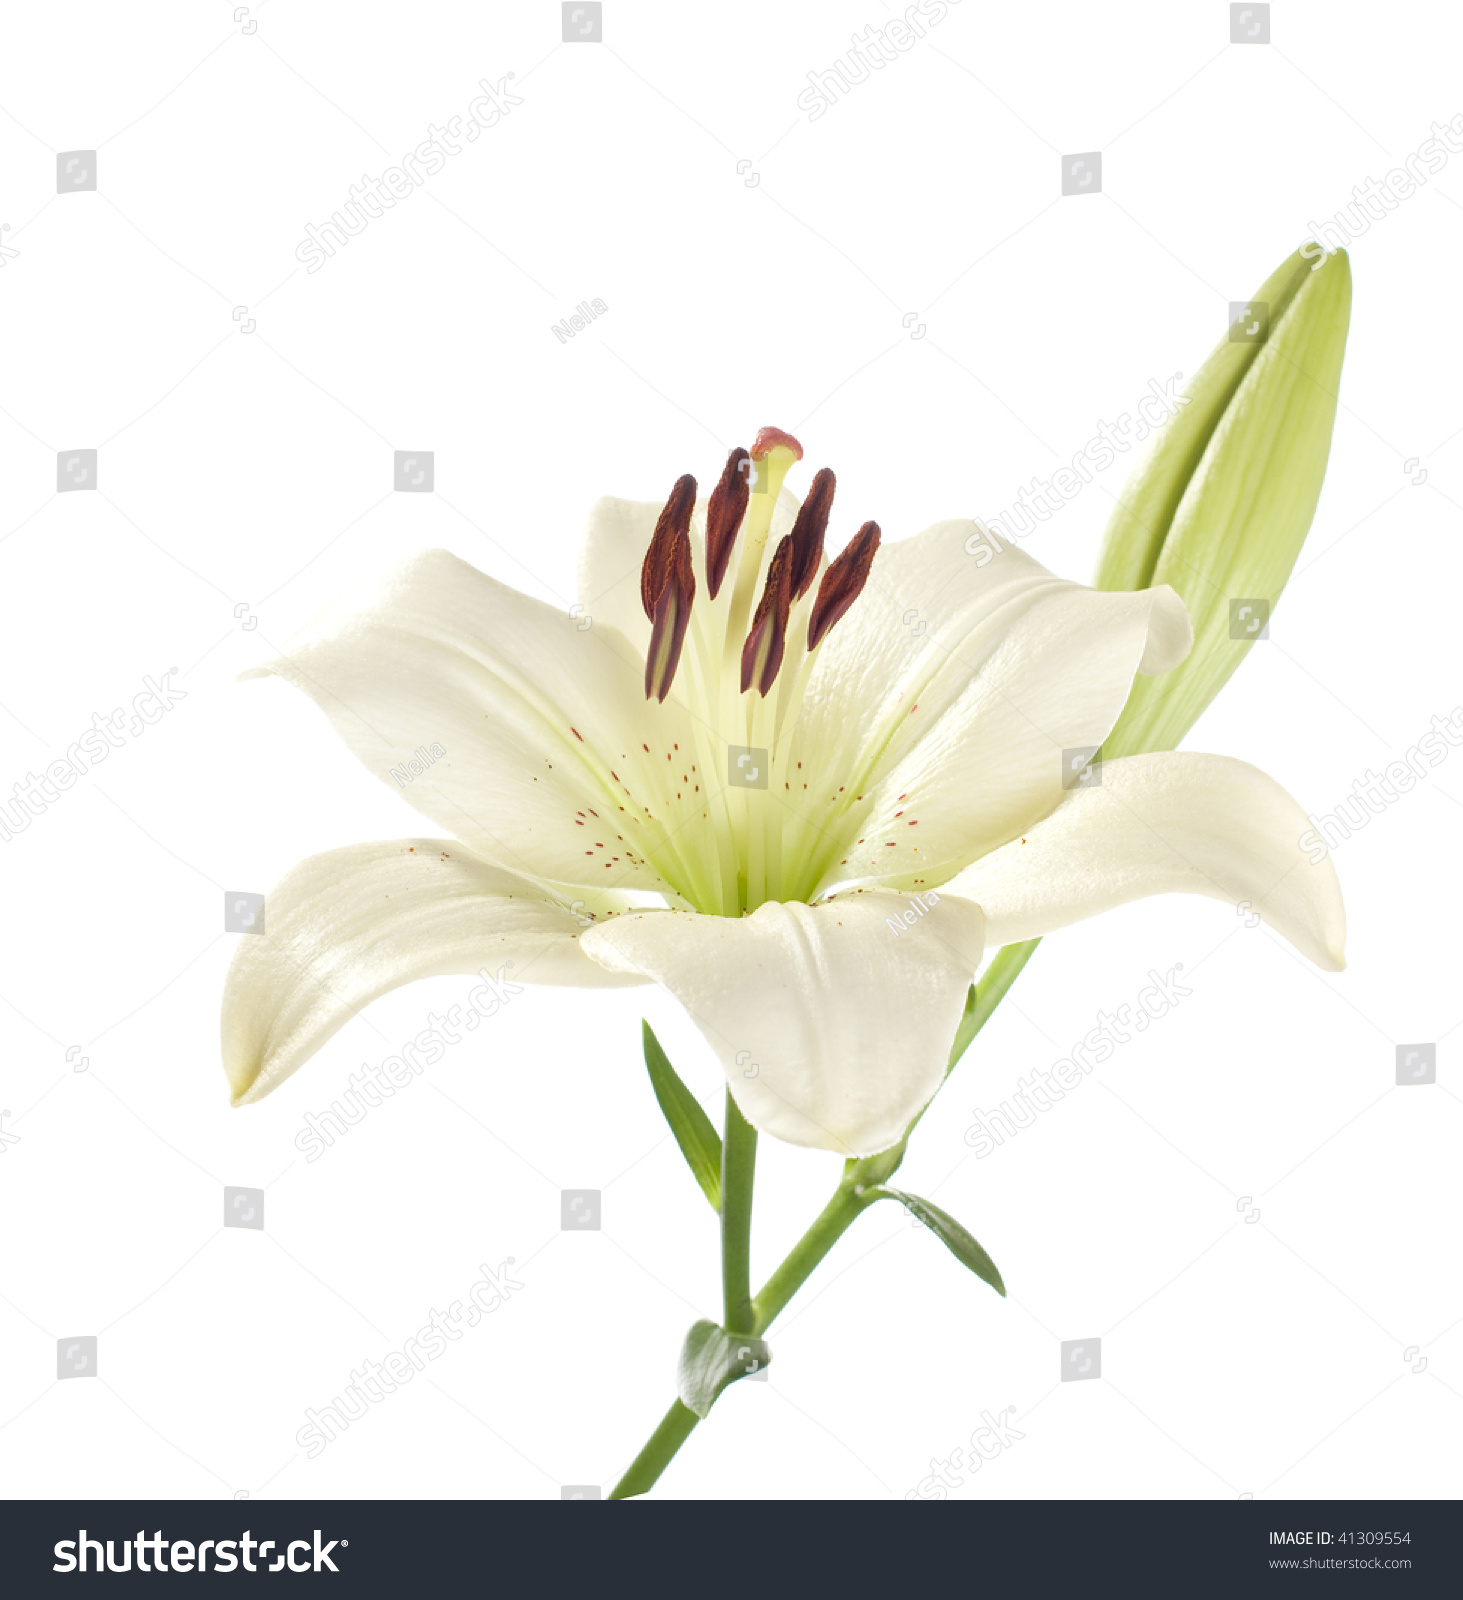 White Lily On A White Background Stock Photo 41309554 : Shutterstock